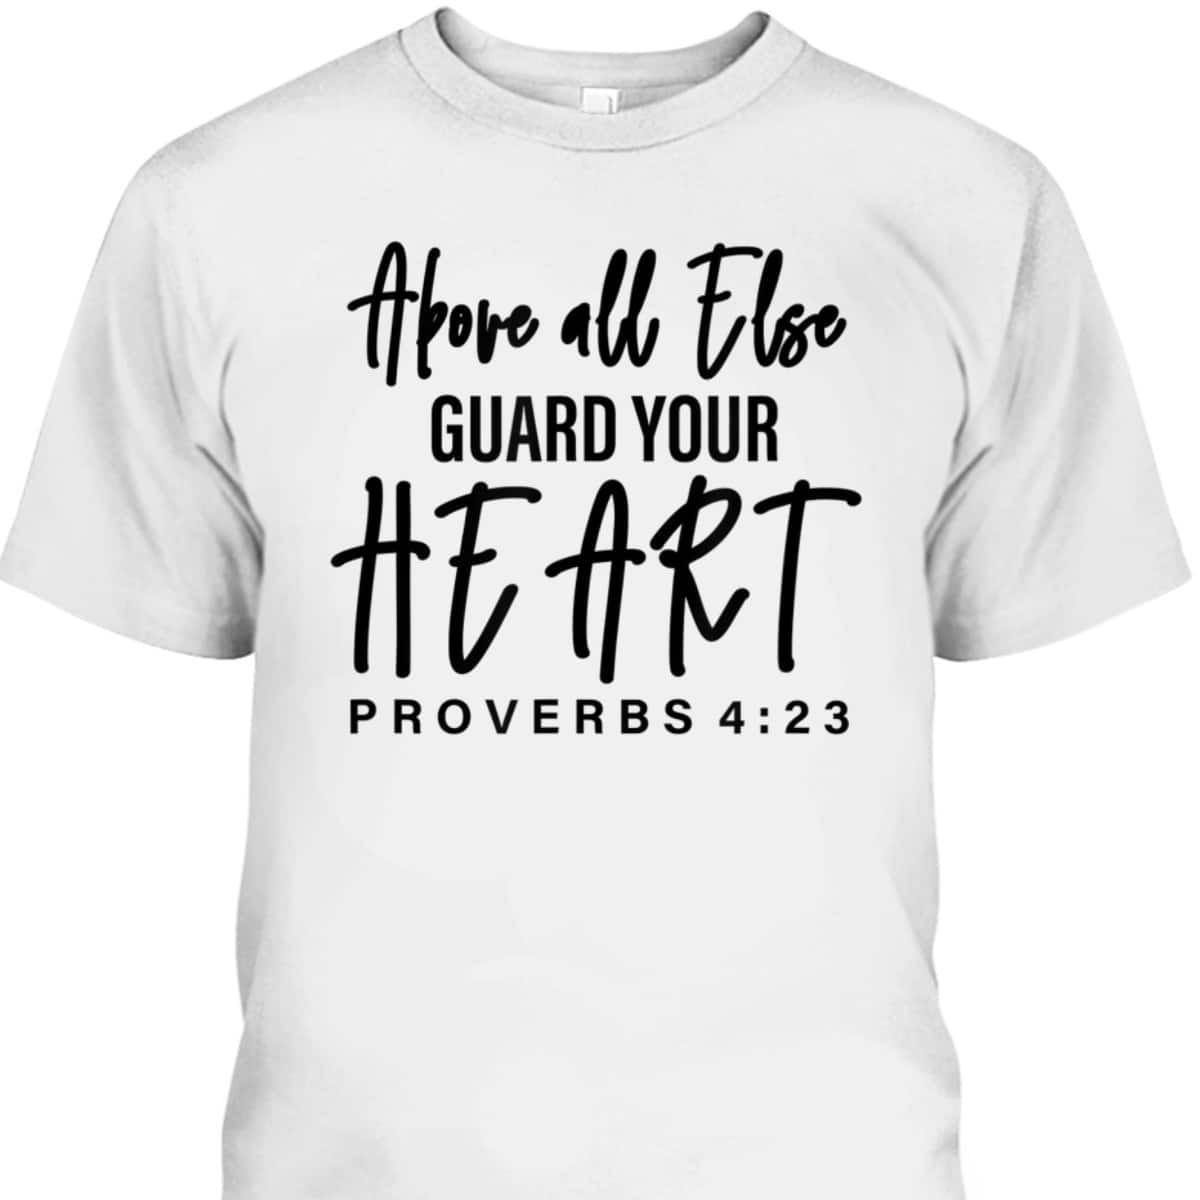 Proverbs 4:23 Bible Verse T-Shirt Above All Else Guard Your Heart